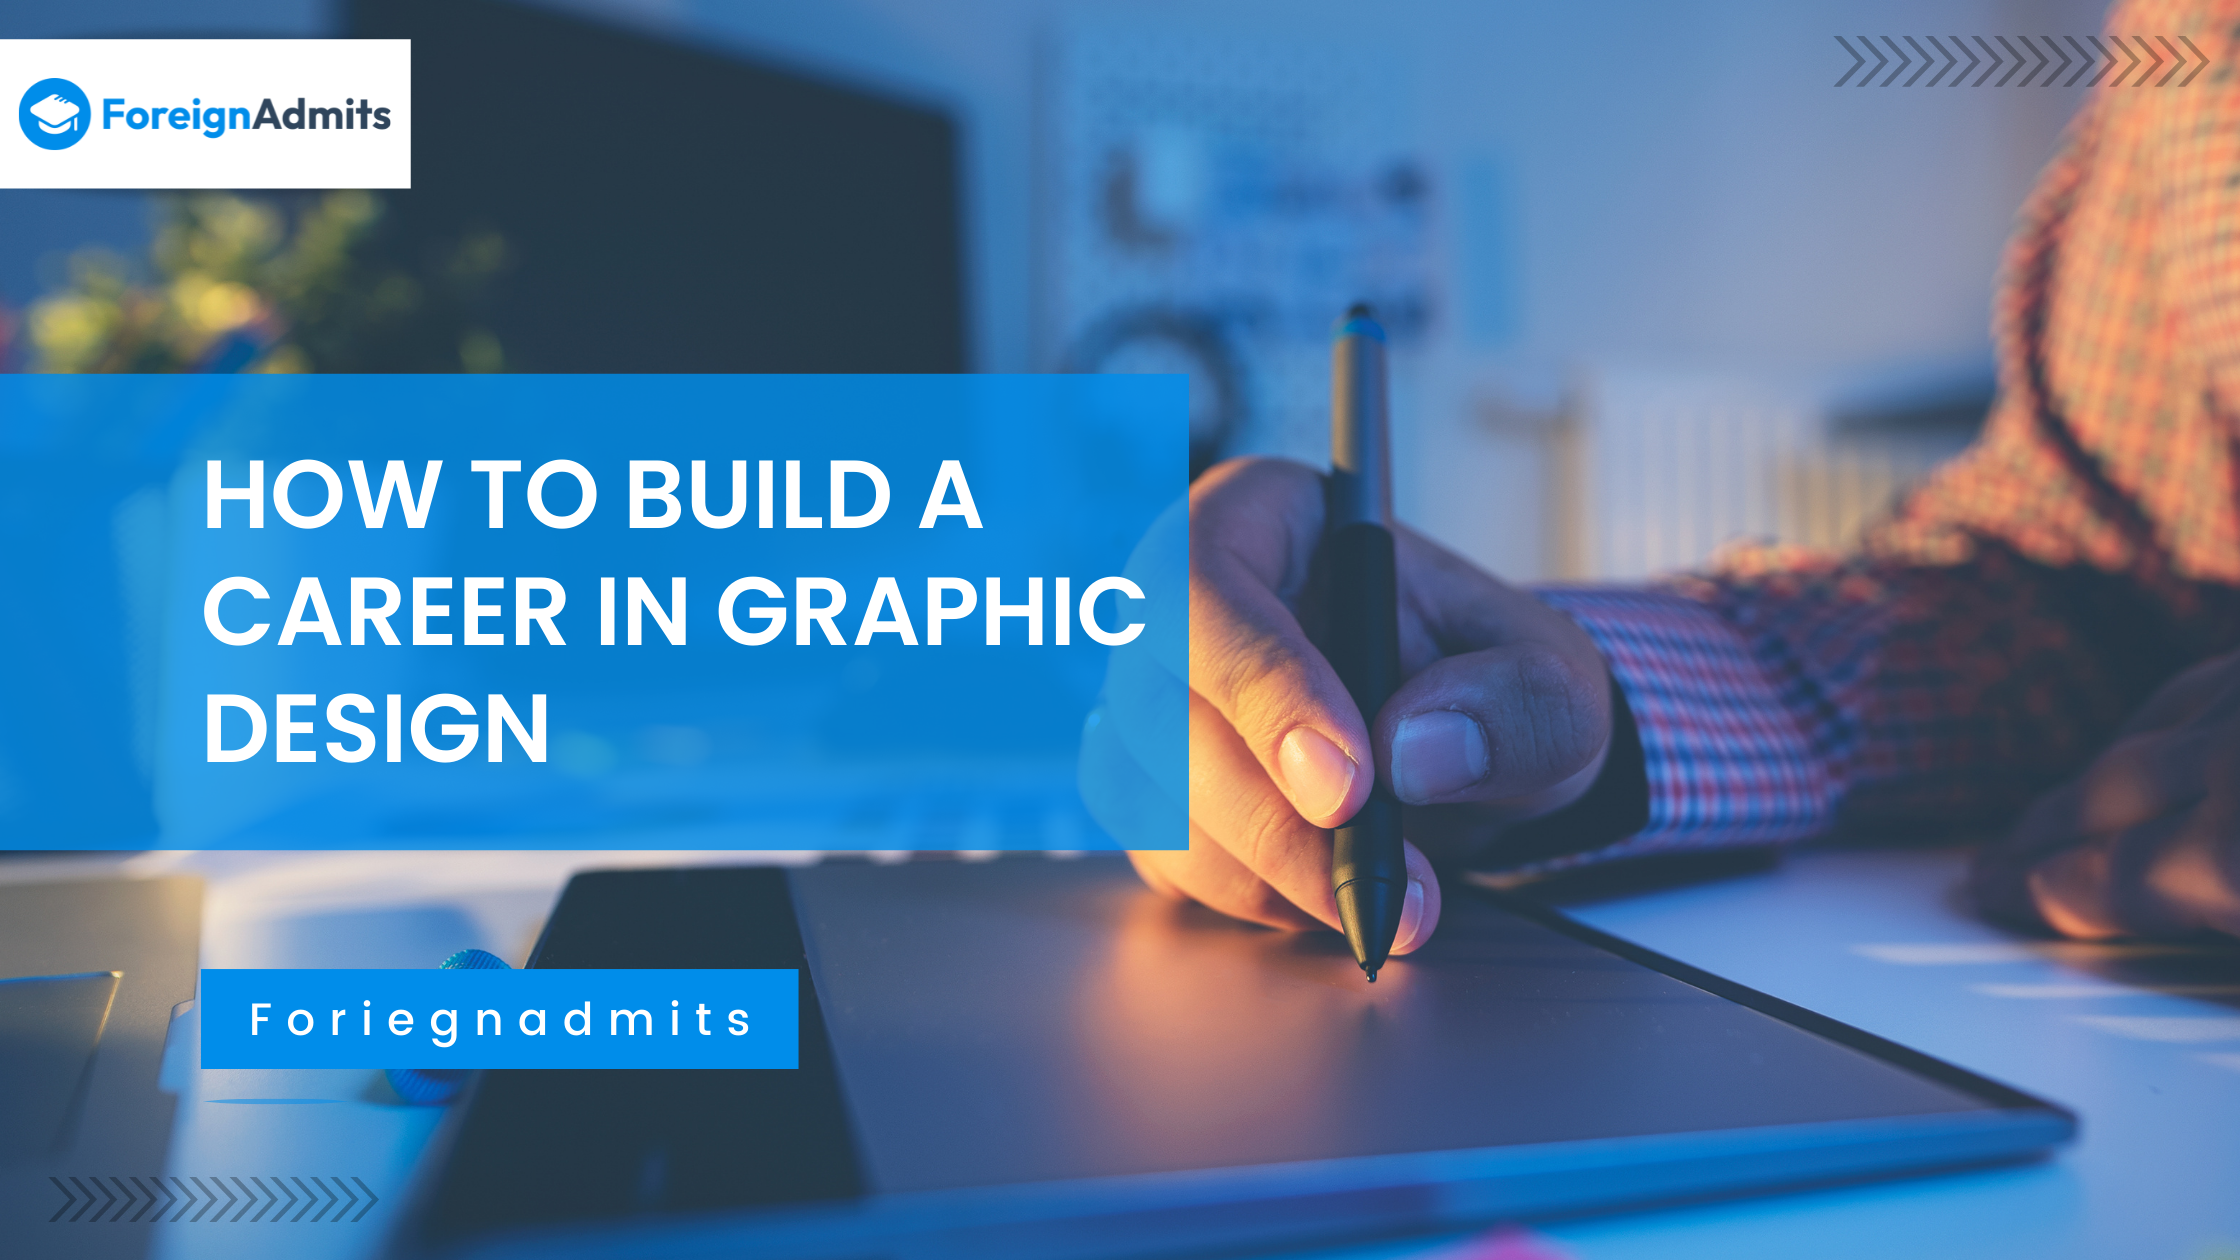 How to Build a Career in Graphic Design